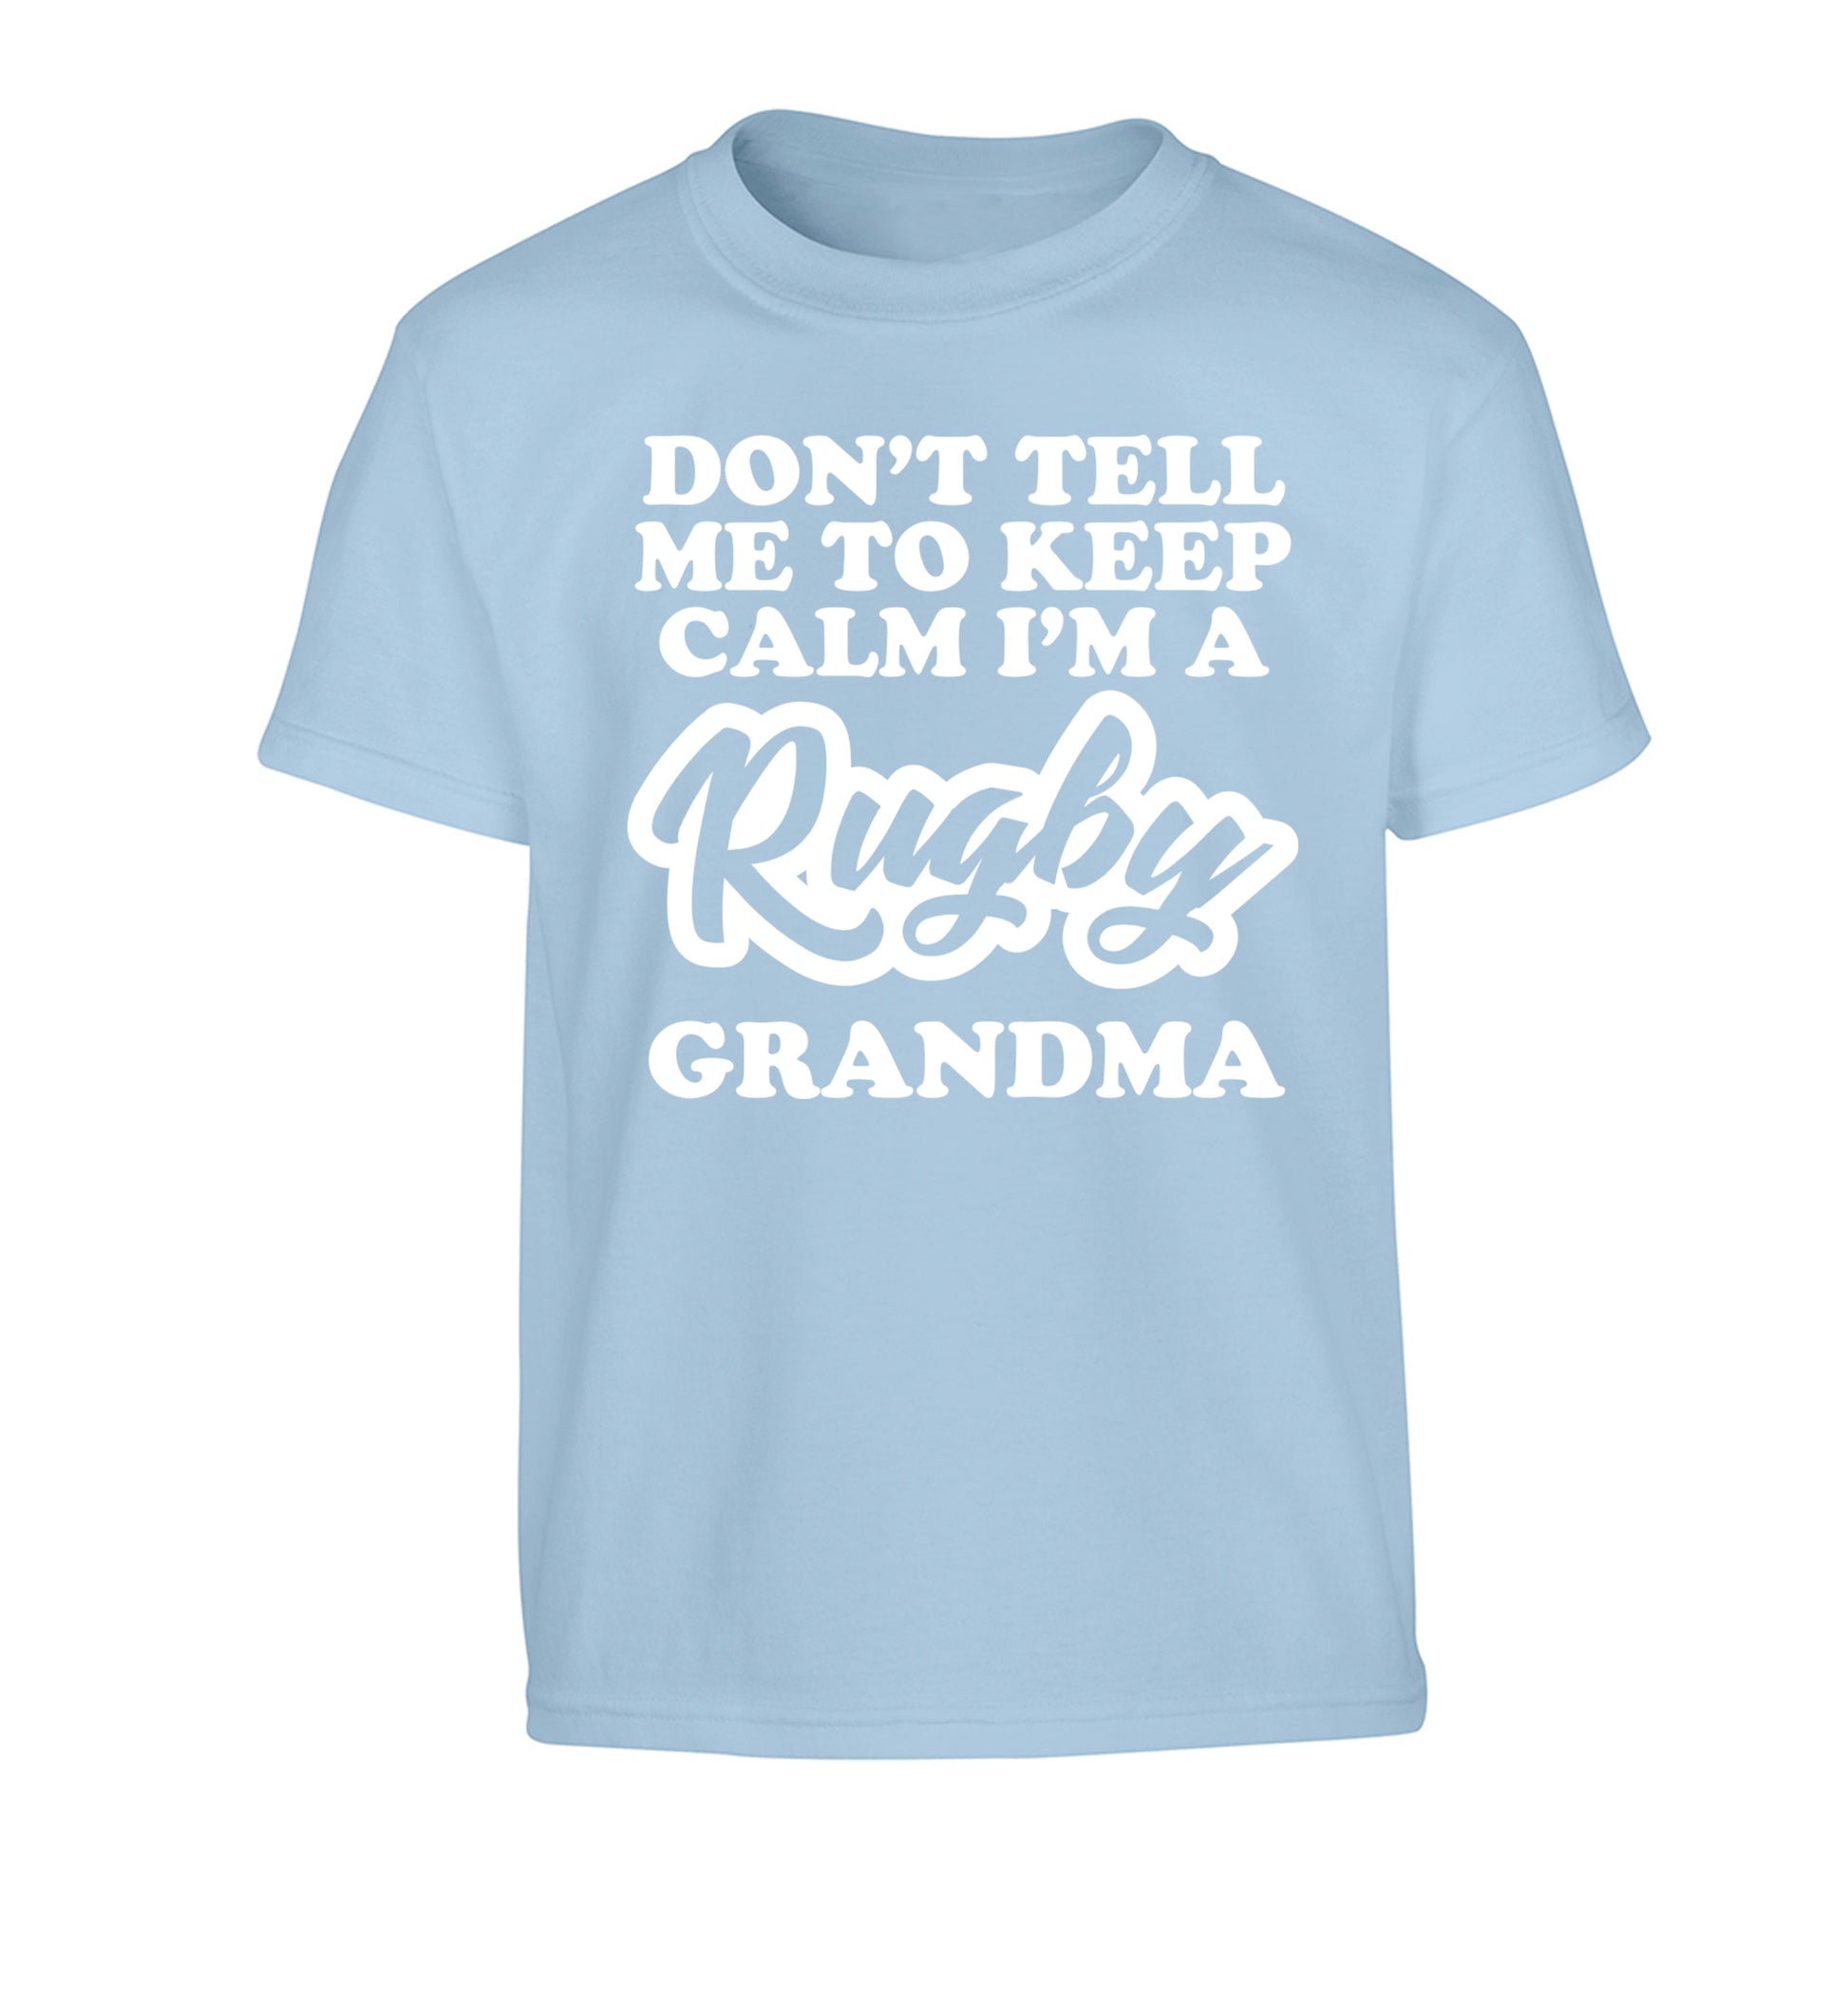 Don't tell me to keep calm I'm a rugby grandma Children's light blue Tshirt 12-13 Years